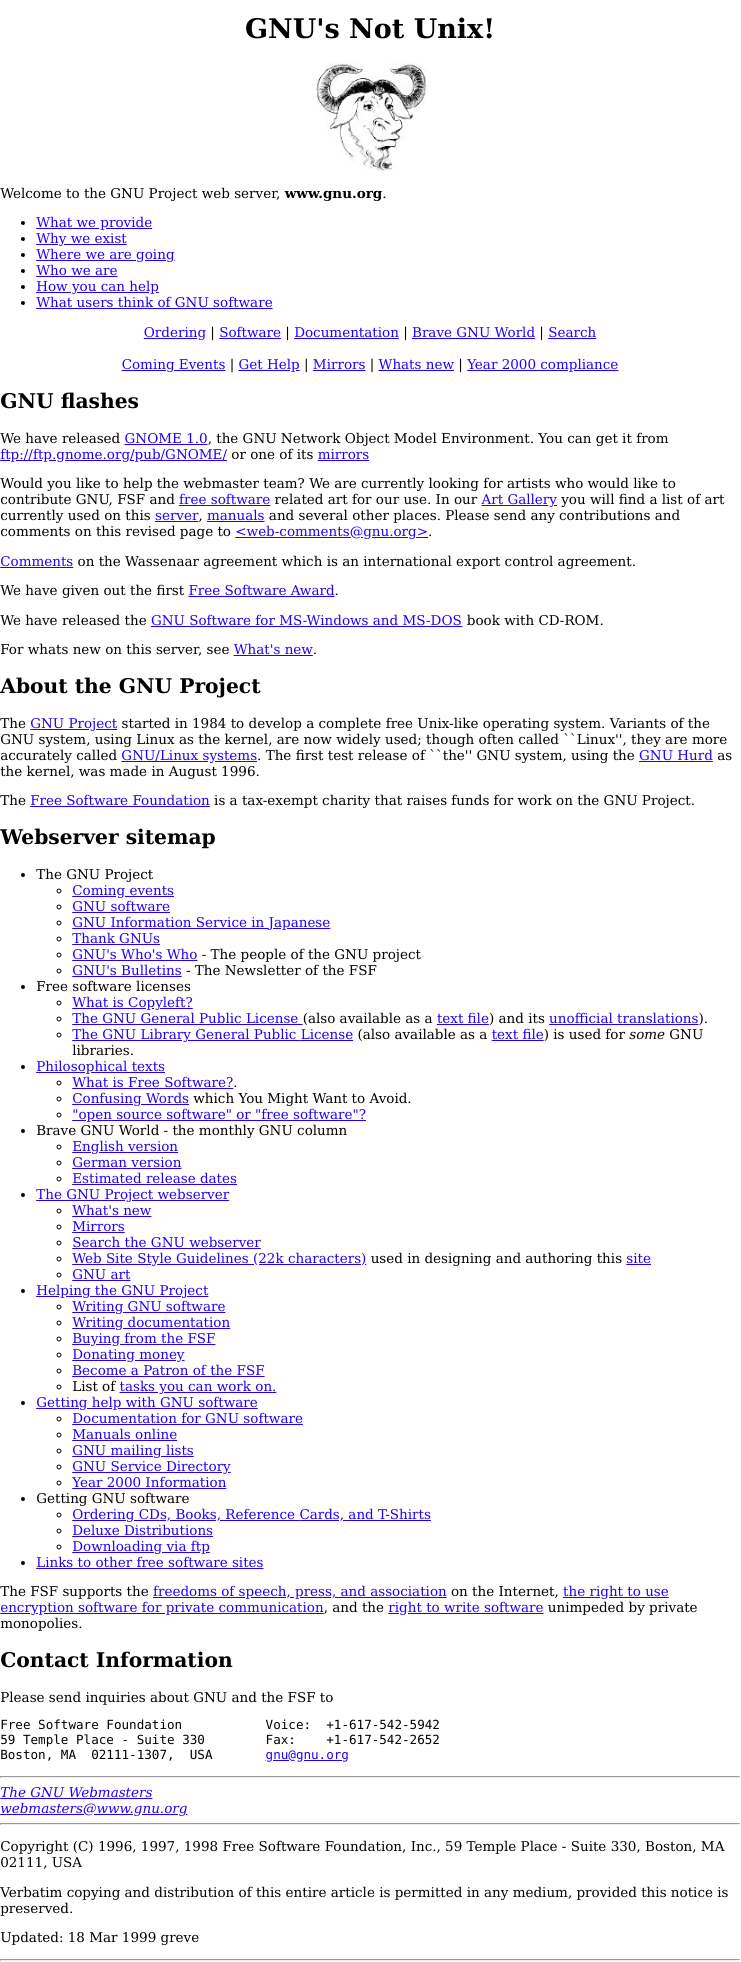 The FSF's Web site in 1999